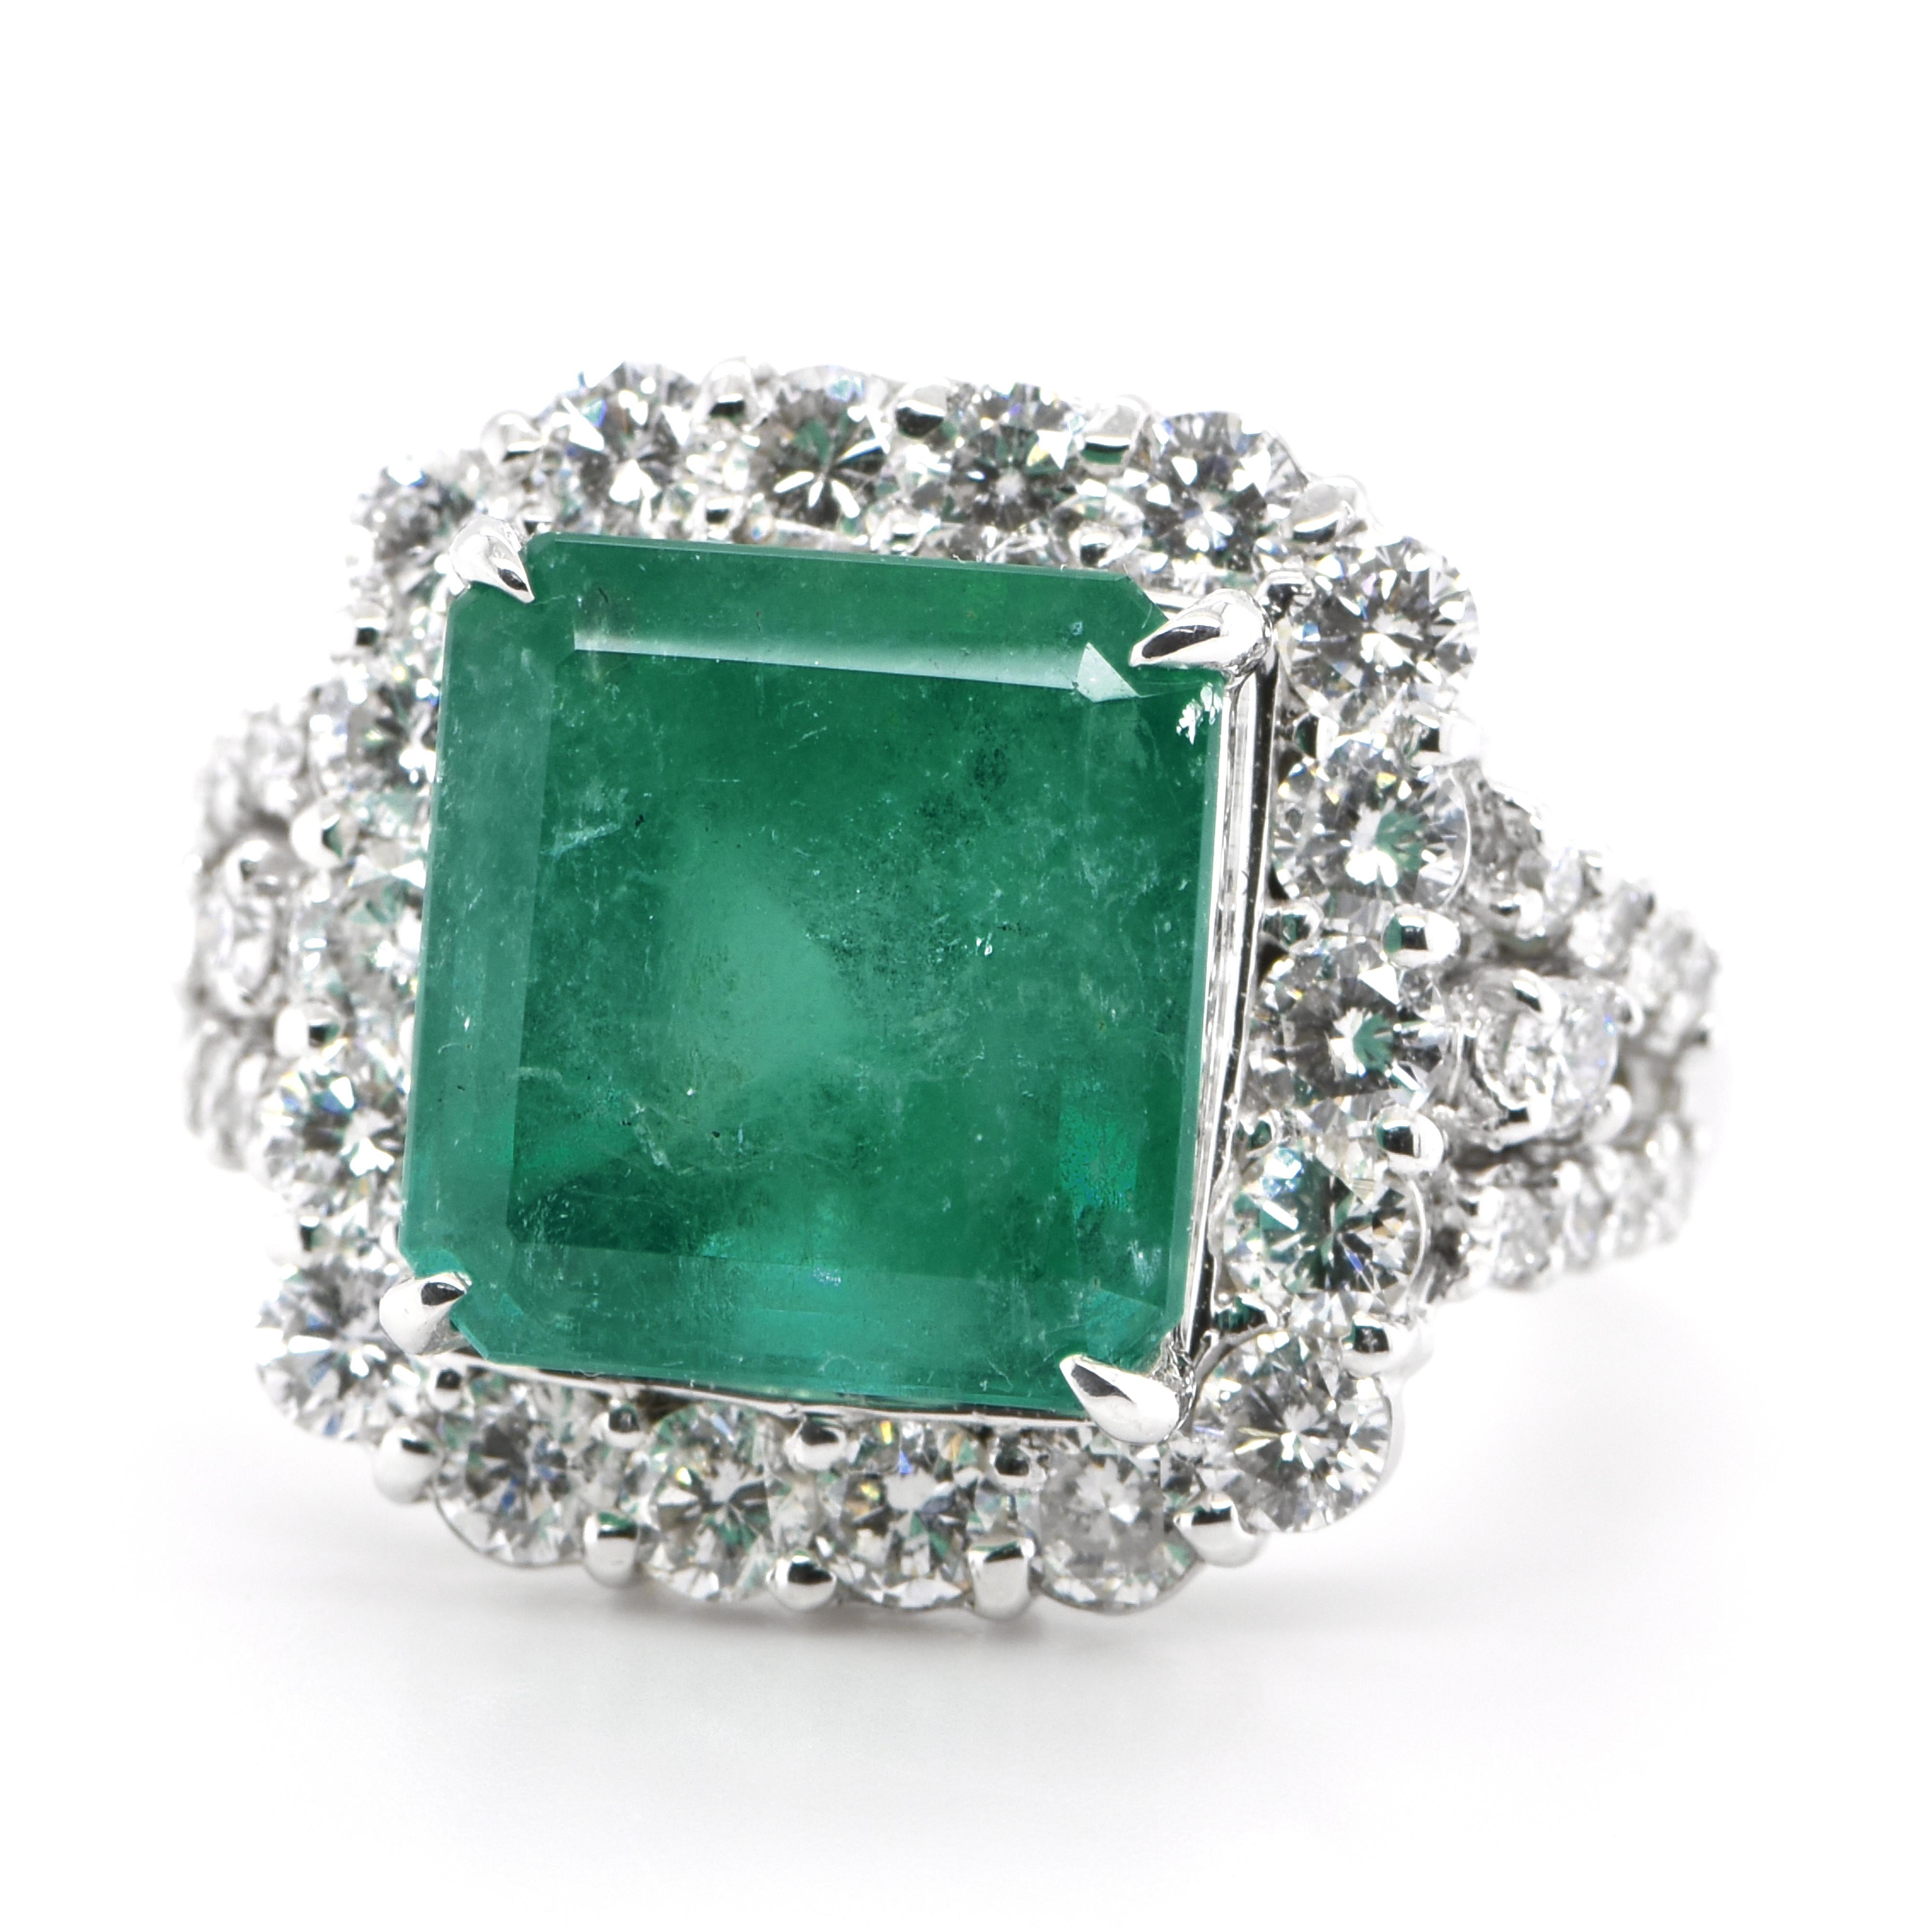 A stunning ring featuring a 6.577 Carat Natural Emerald and 1.60 Carats of Diamond Accents set in Platinum. People have admired emerald’s green for thousands of years. Emeralds have always been associated with the lushest landscapes and the richest